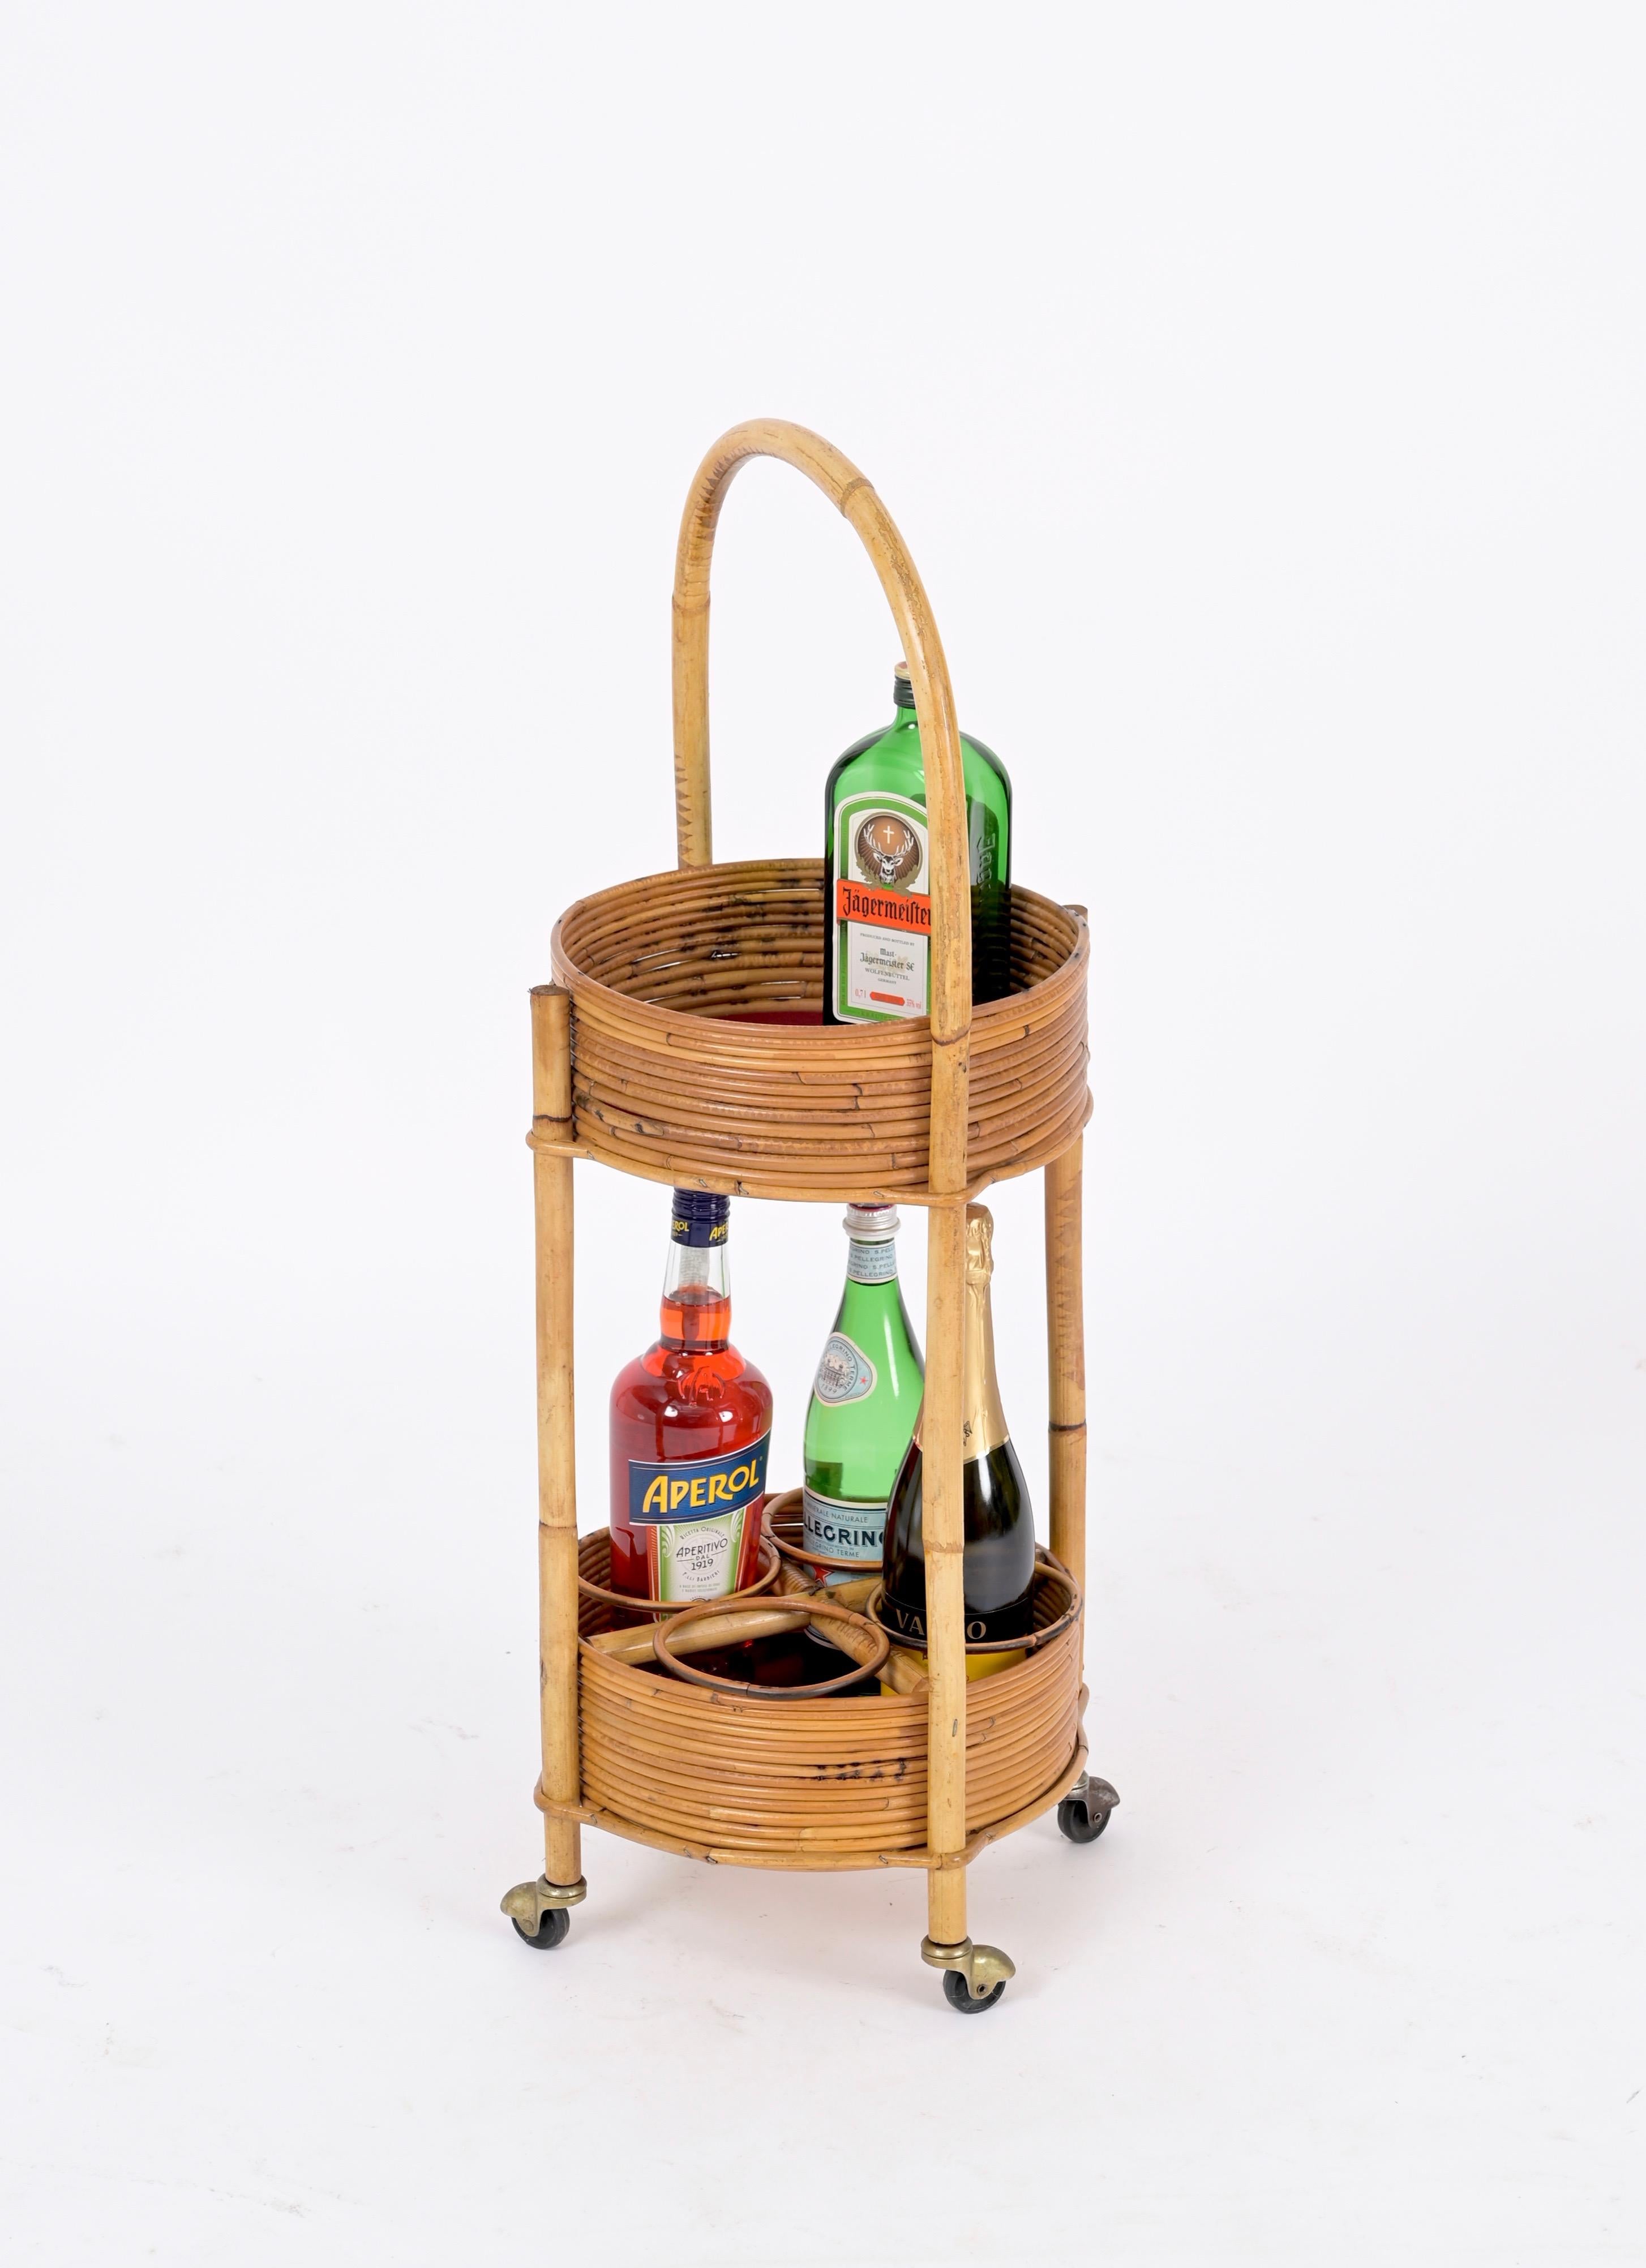 Lovely French Riviera style serving cart made in curved rattan, bamboo and velvet with brass wheels. This delightful object was made in Italy during the 1960s.

This gorgeous two tier bar cart has a round structure made in curved rattan and bamboo,